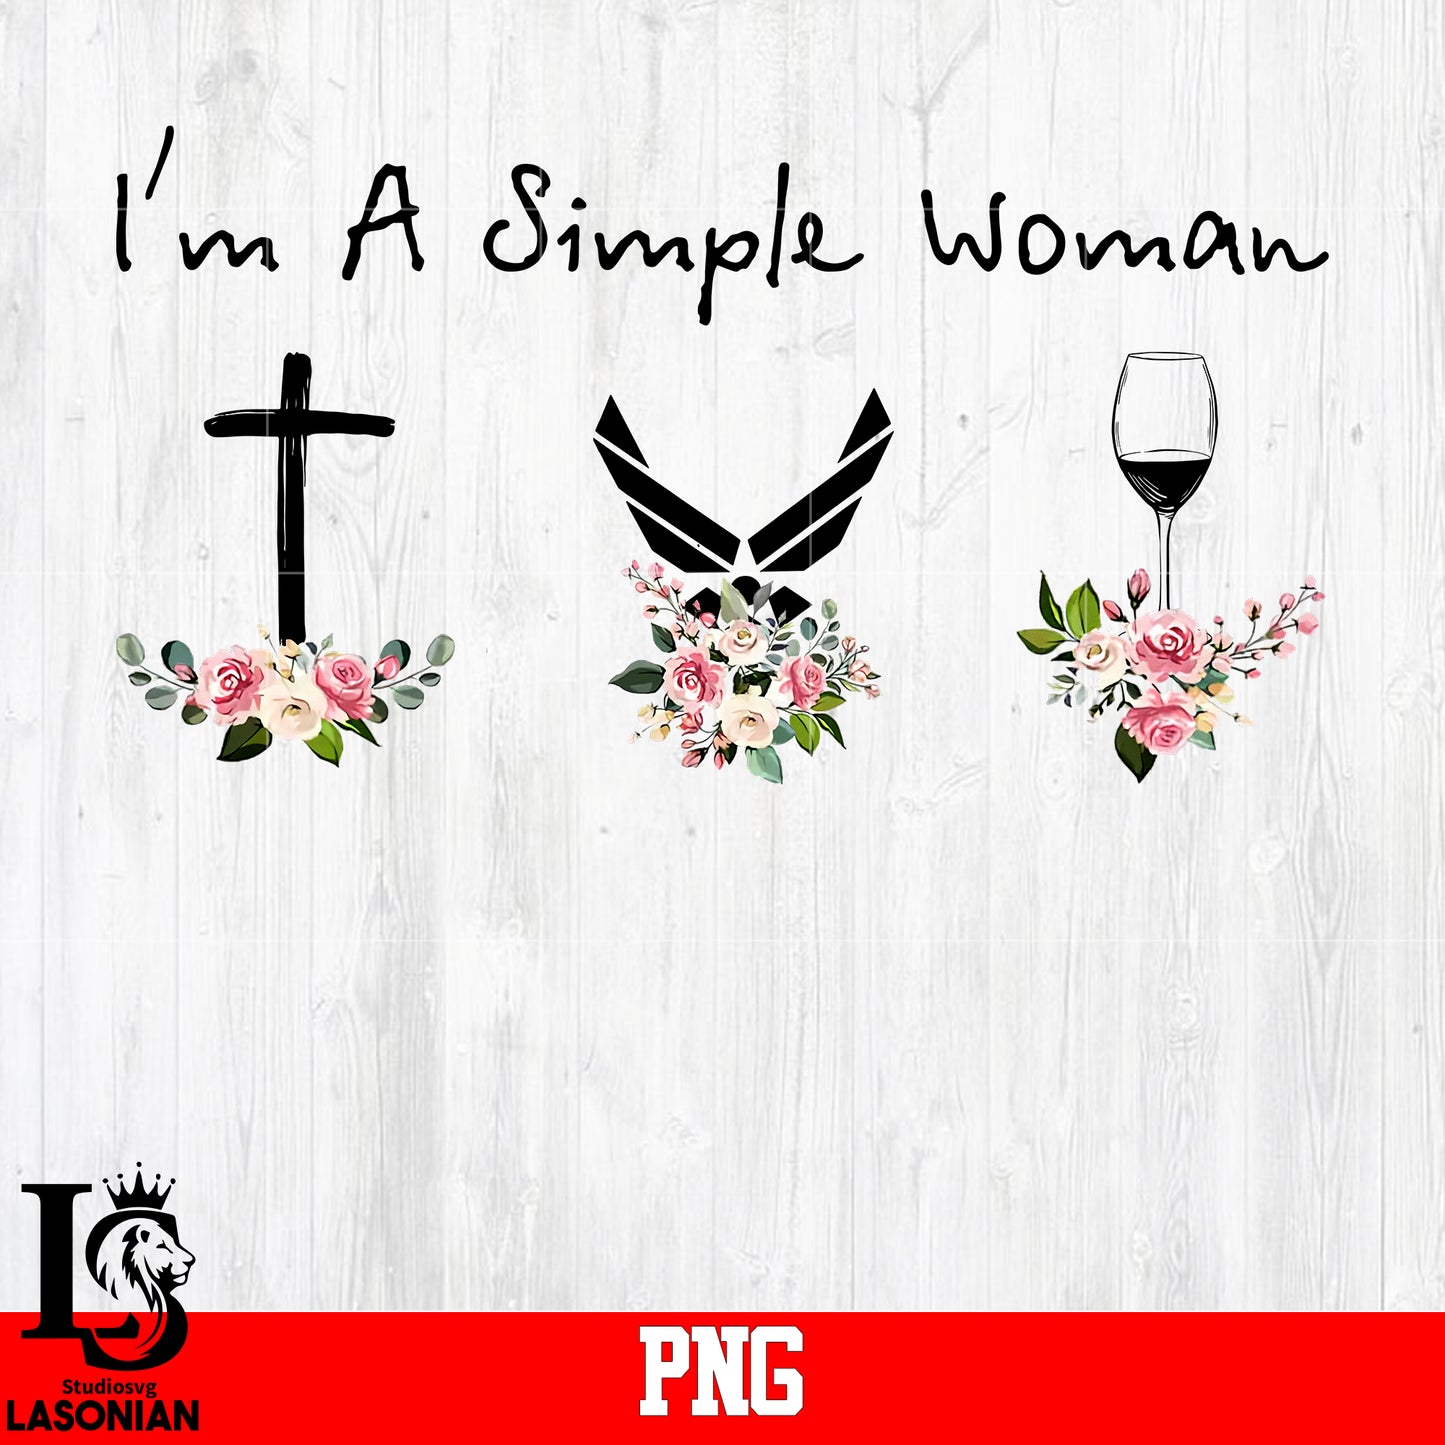 I'm A Simple Woman PNG file